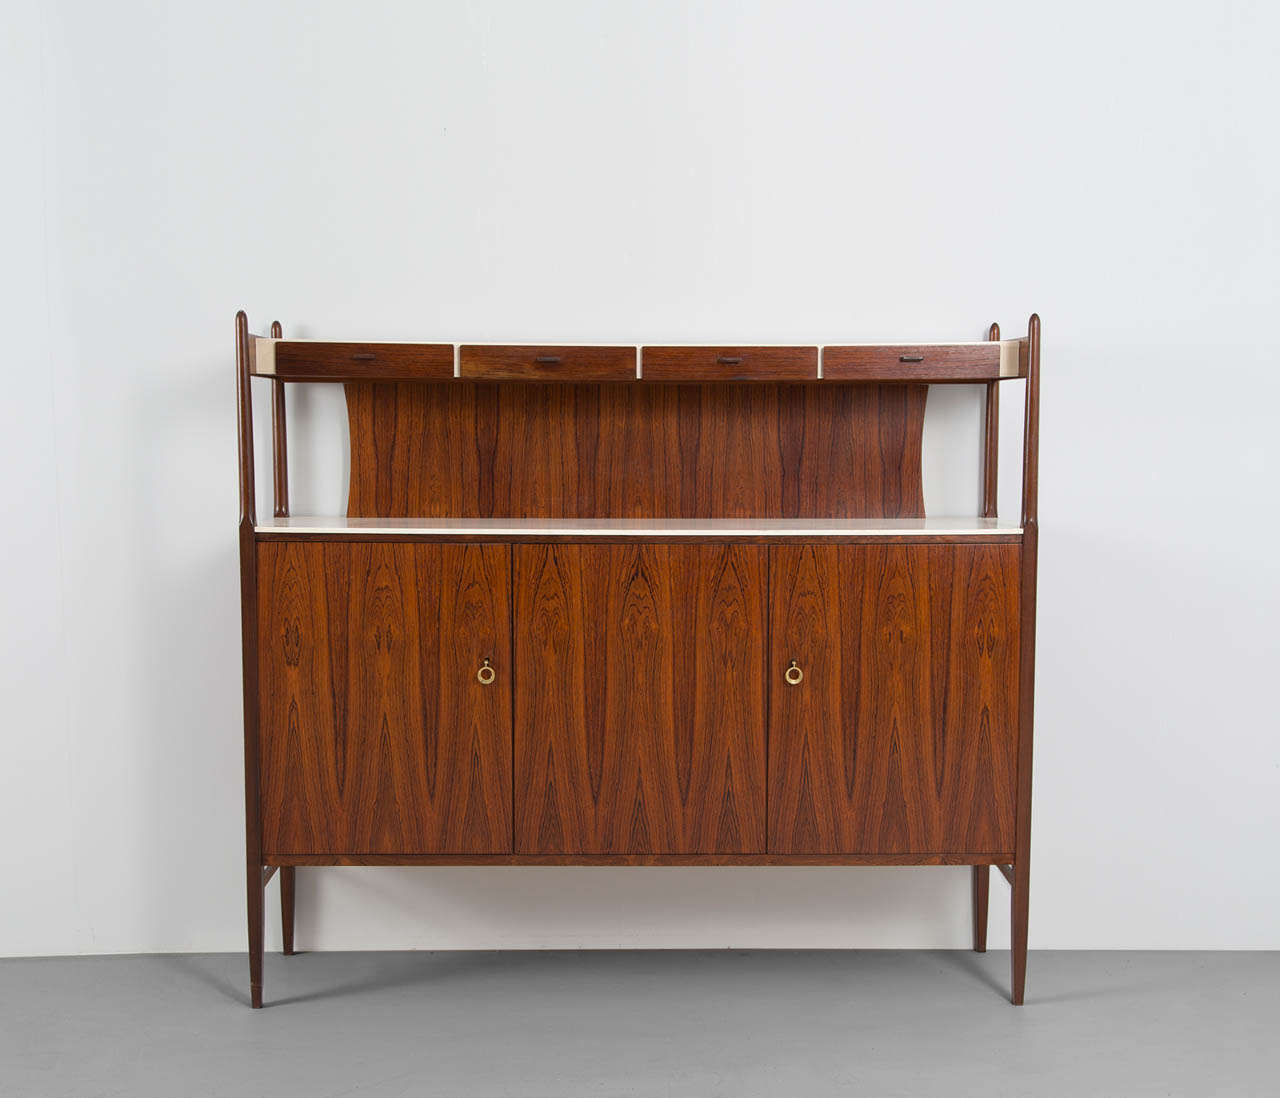 Highboard, rosewood, brass, Denmark, ca. 1950.

The bottom unit of this console consists out of three doors with shelving on the inside, with a white lacquered top. The top unit has four small drawers, perfect for cutlery or other small items, also